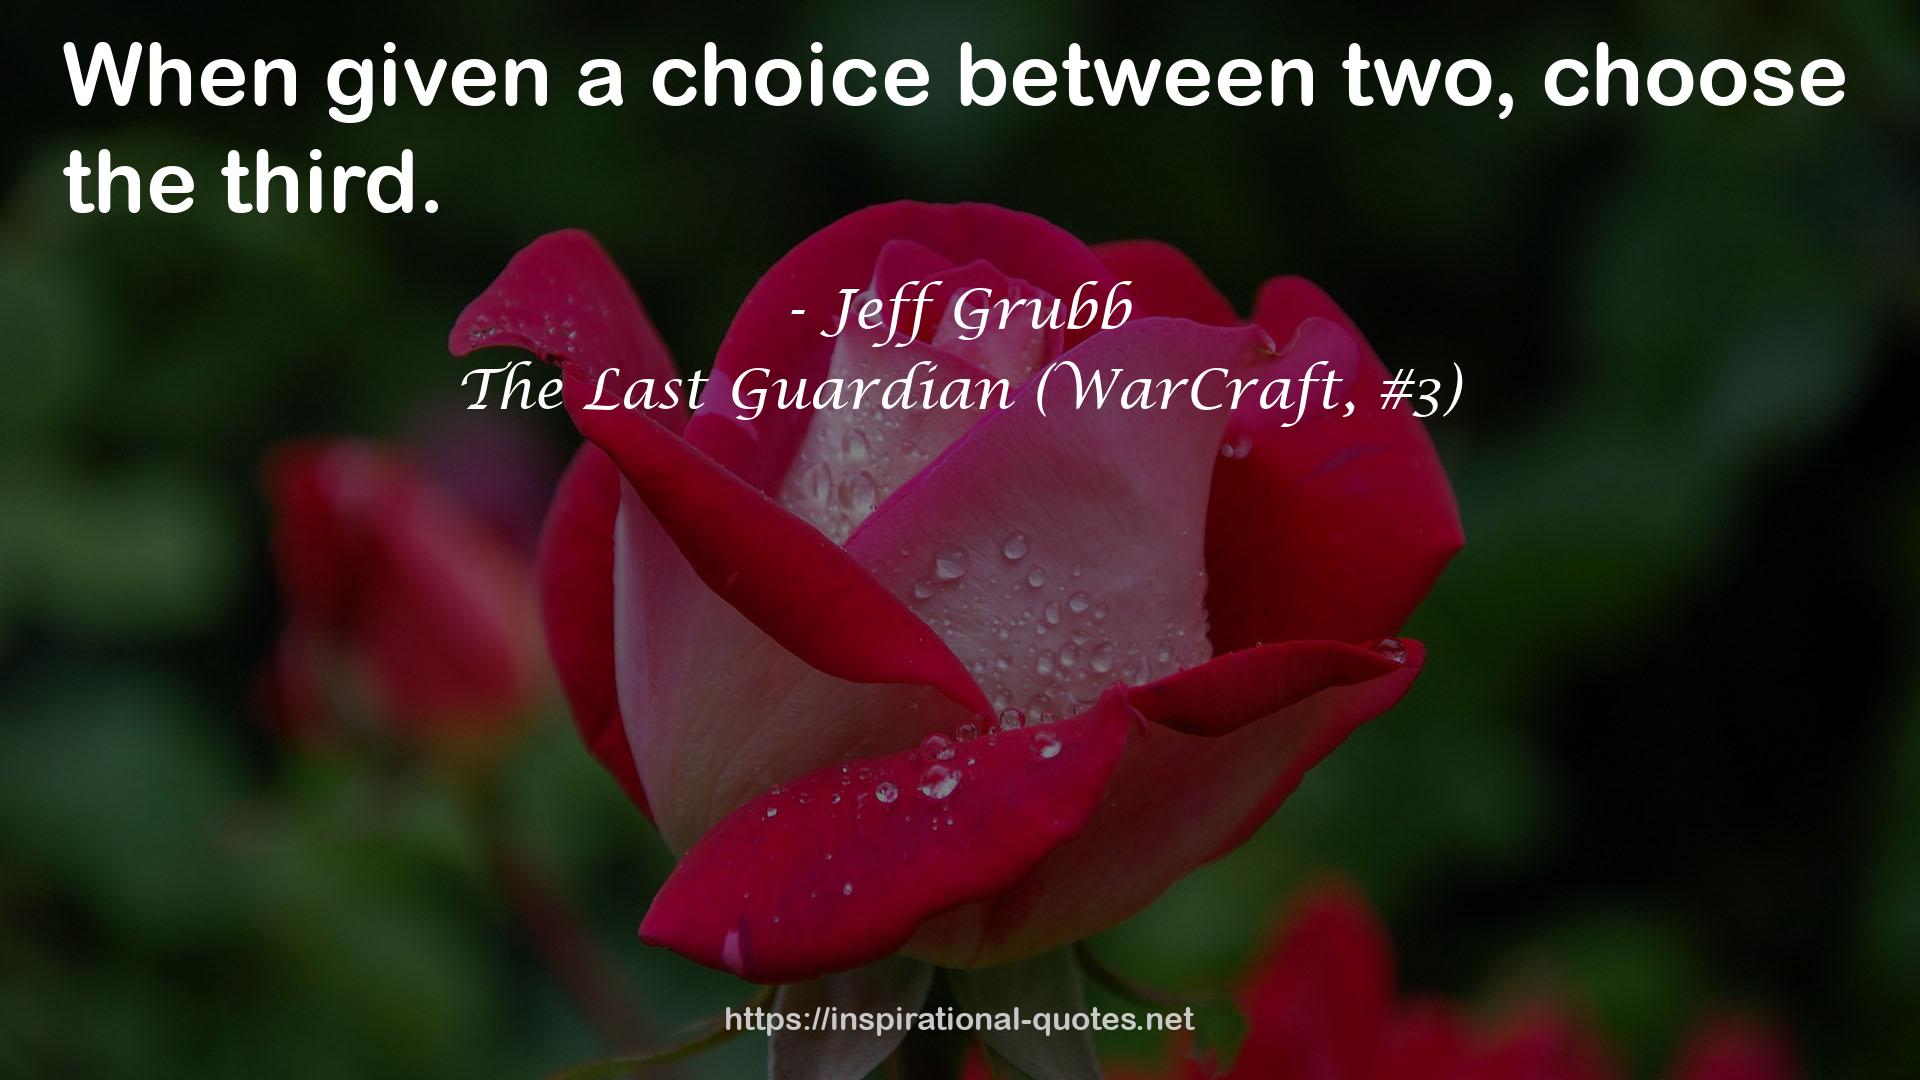 The Last Guardian (WarCraft, #3) QUOTES